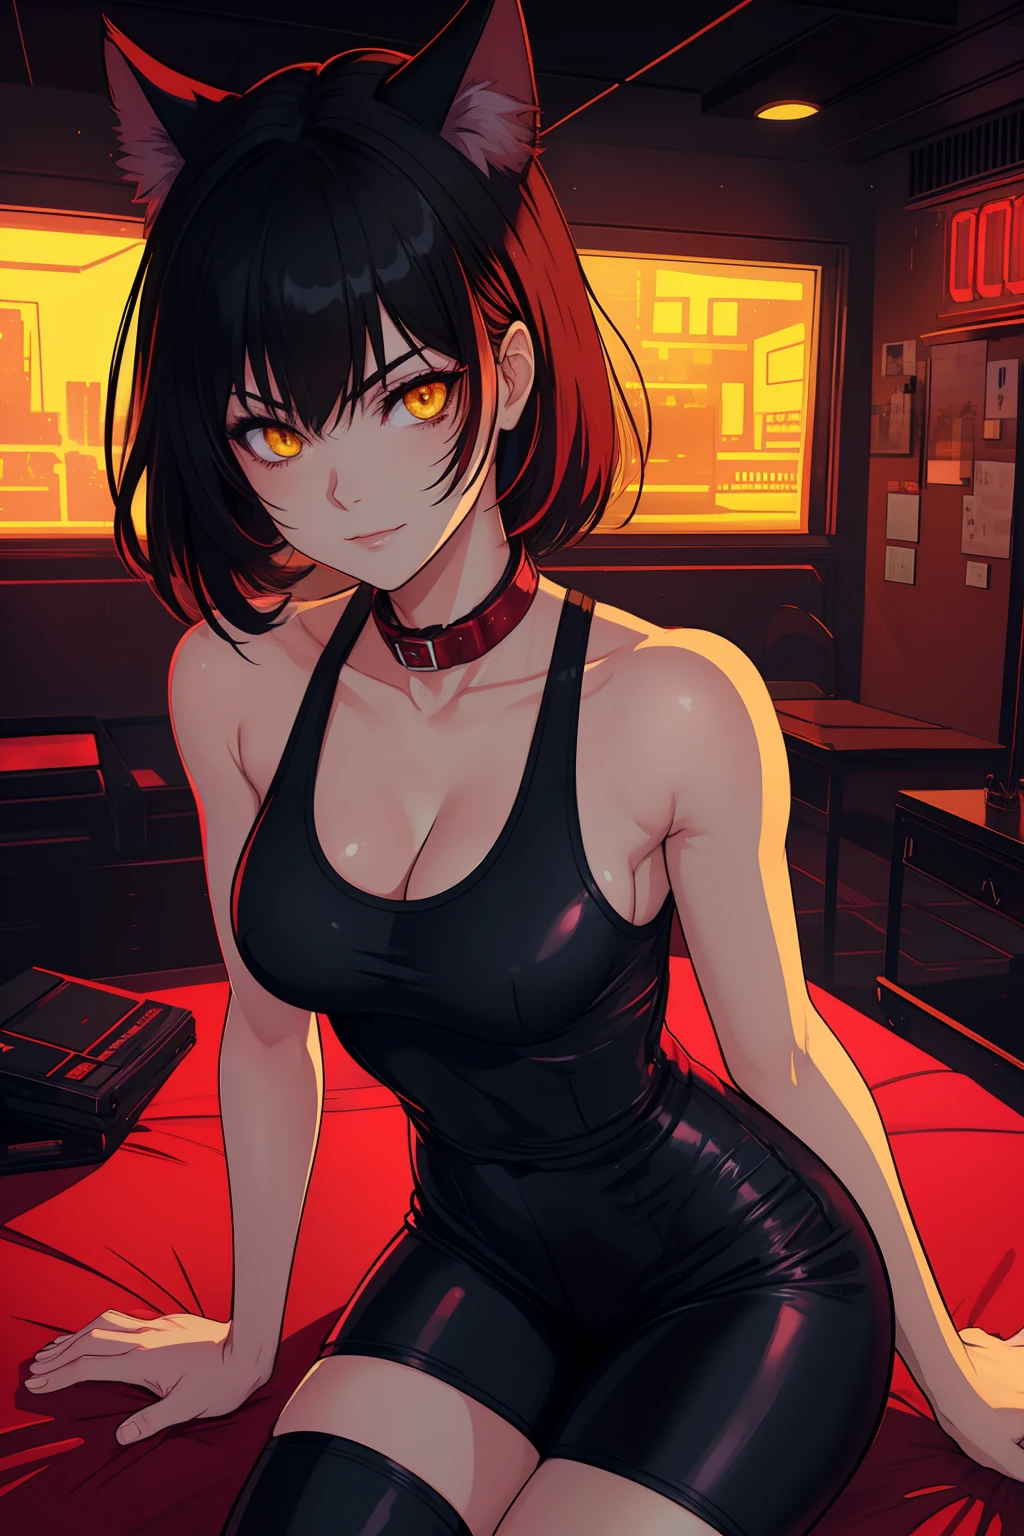 (((Portrait))), (NSFW, slim body), (best quality, 4k, 8k, high-res, ultra-detailed, anime style, paste, warm), catgirl, black hair, yellow glowing eyes, looking at viewer, smug, slightly smiling, goth makeup, collar, synthwave interior,l, vaporwave interior, red lightning, red interior aesthetic, red light, dark red lights, black tank top, black leggings